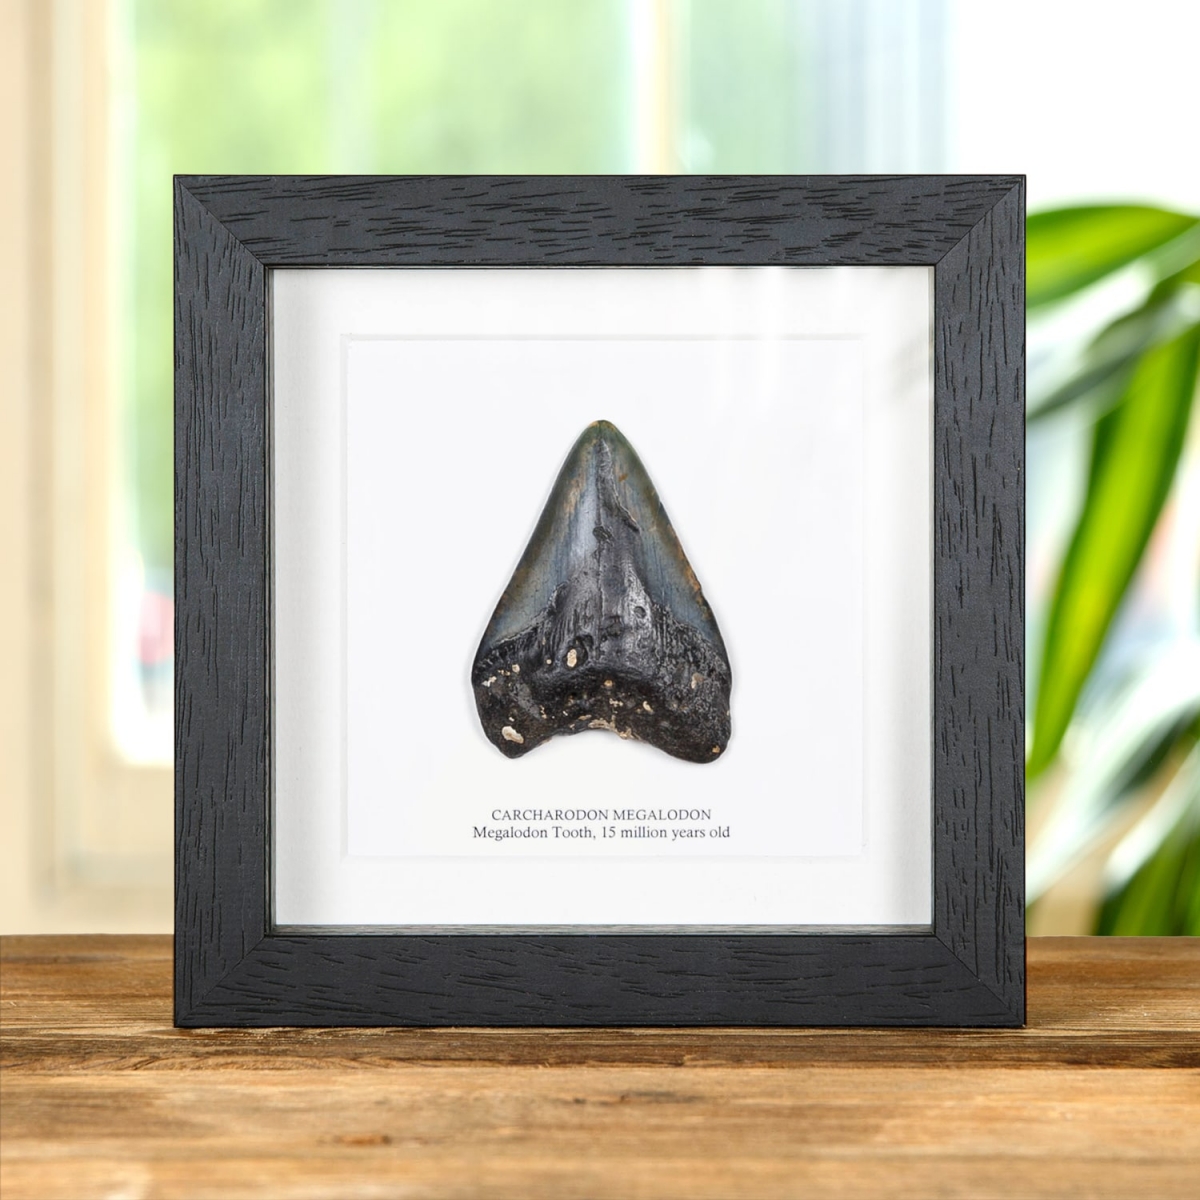 Minibeast Large Black Megalodon Shark Tooth (Carcharodon megalodon) Fossil in Box Frame